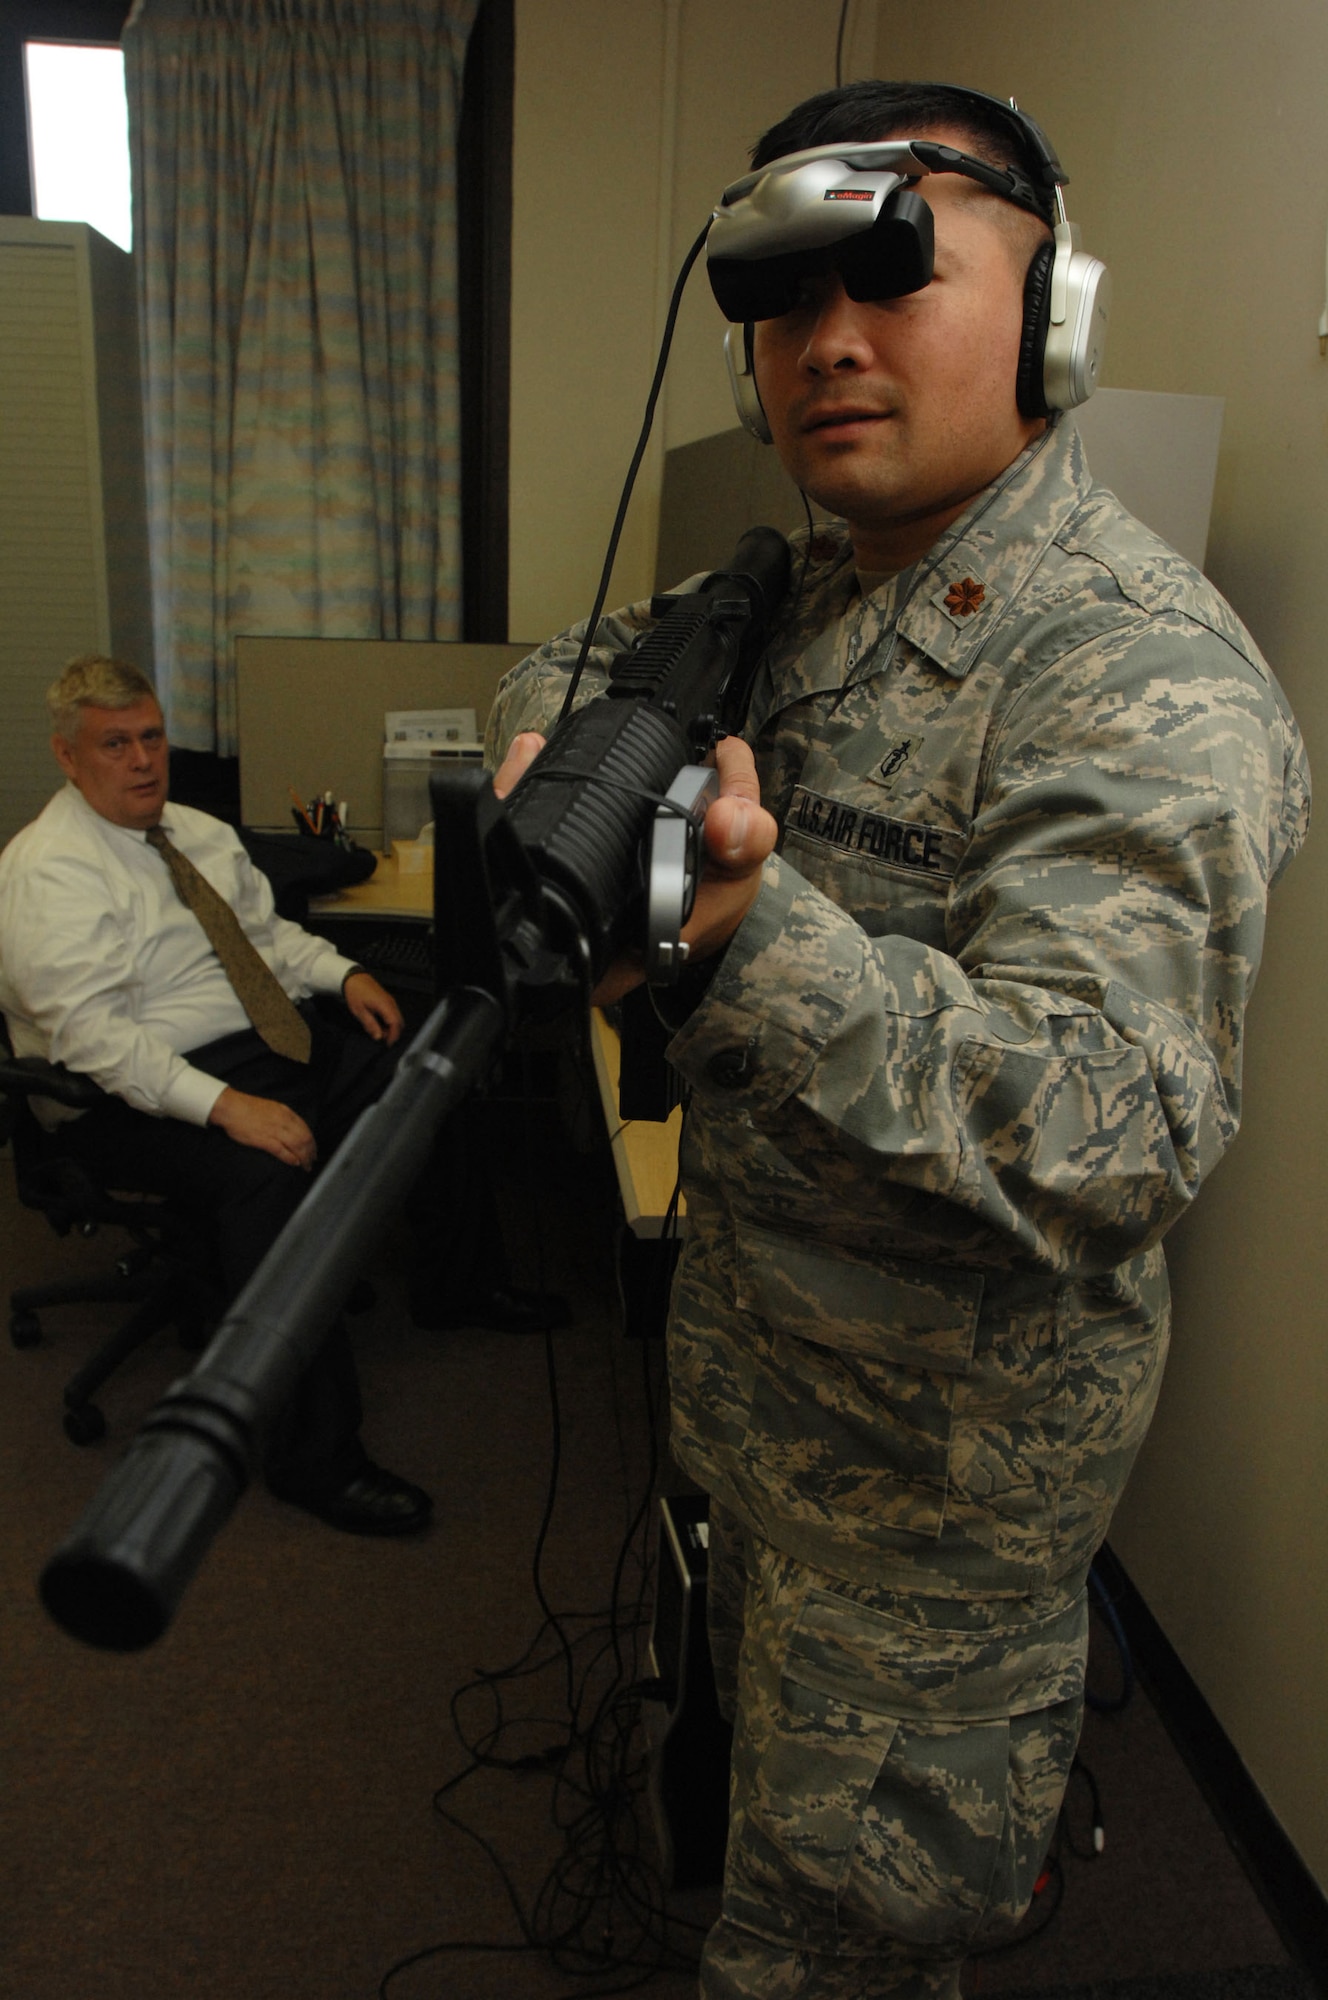 Dr. Alan Maiers (left), assistant chief, Warrior Resiliency Program, simulates a virtual reality city patrol for Maj. (Dr.) Monty Baker, director of research, Warrior Resiliency Program, Aug. 26 at Wilford Hall Medical Center, Lackland Air Force Base, Texas. The virtual reality program is designed to treat servicemembers who suffer from post traumatic stress disorder after returning from combat operations. (U.S. Air Force photo by Senior Airman Amber Bressler)